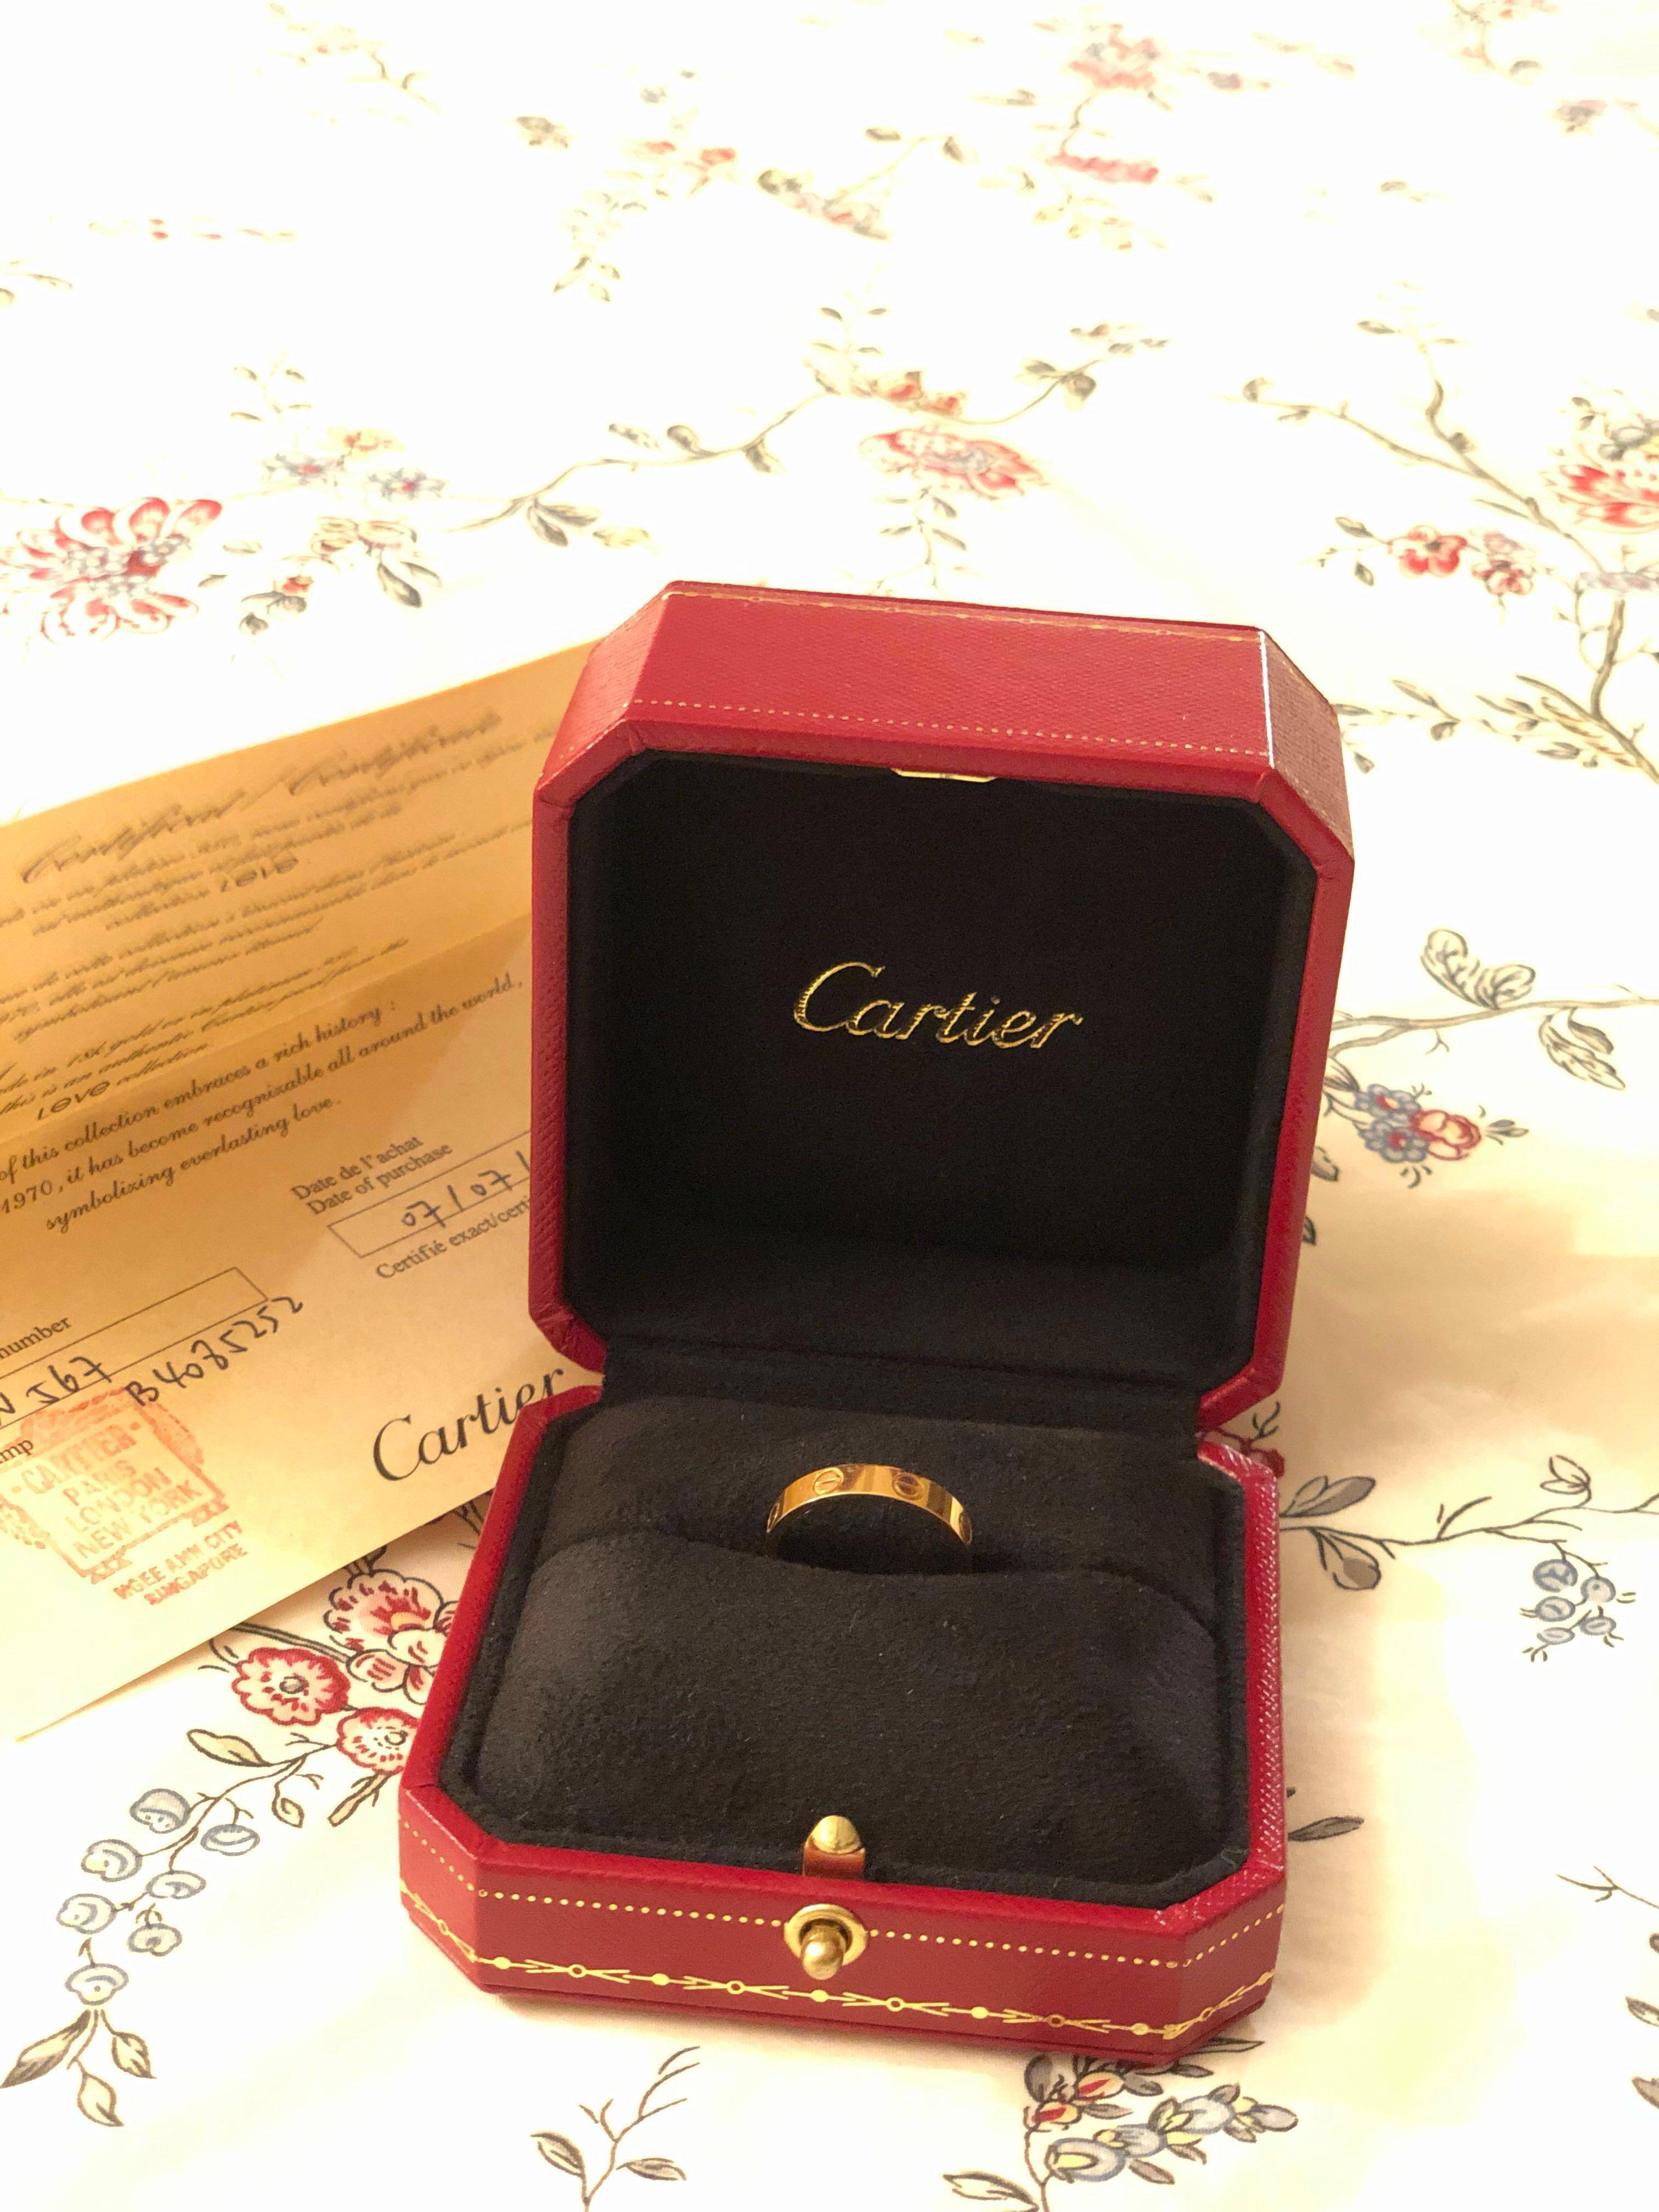 how much is a cartier ring in singapore